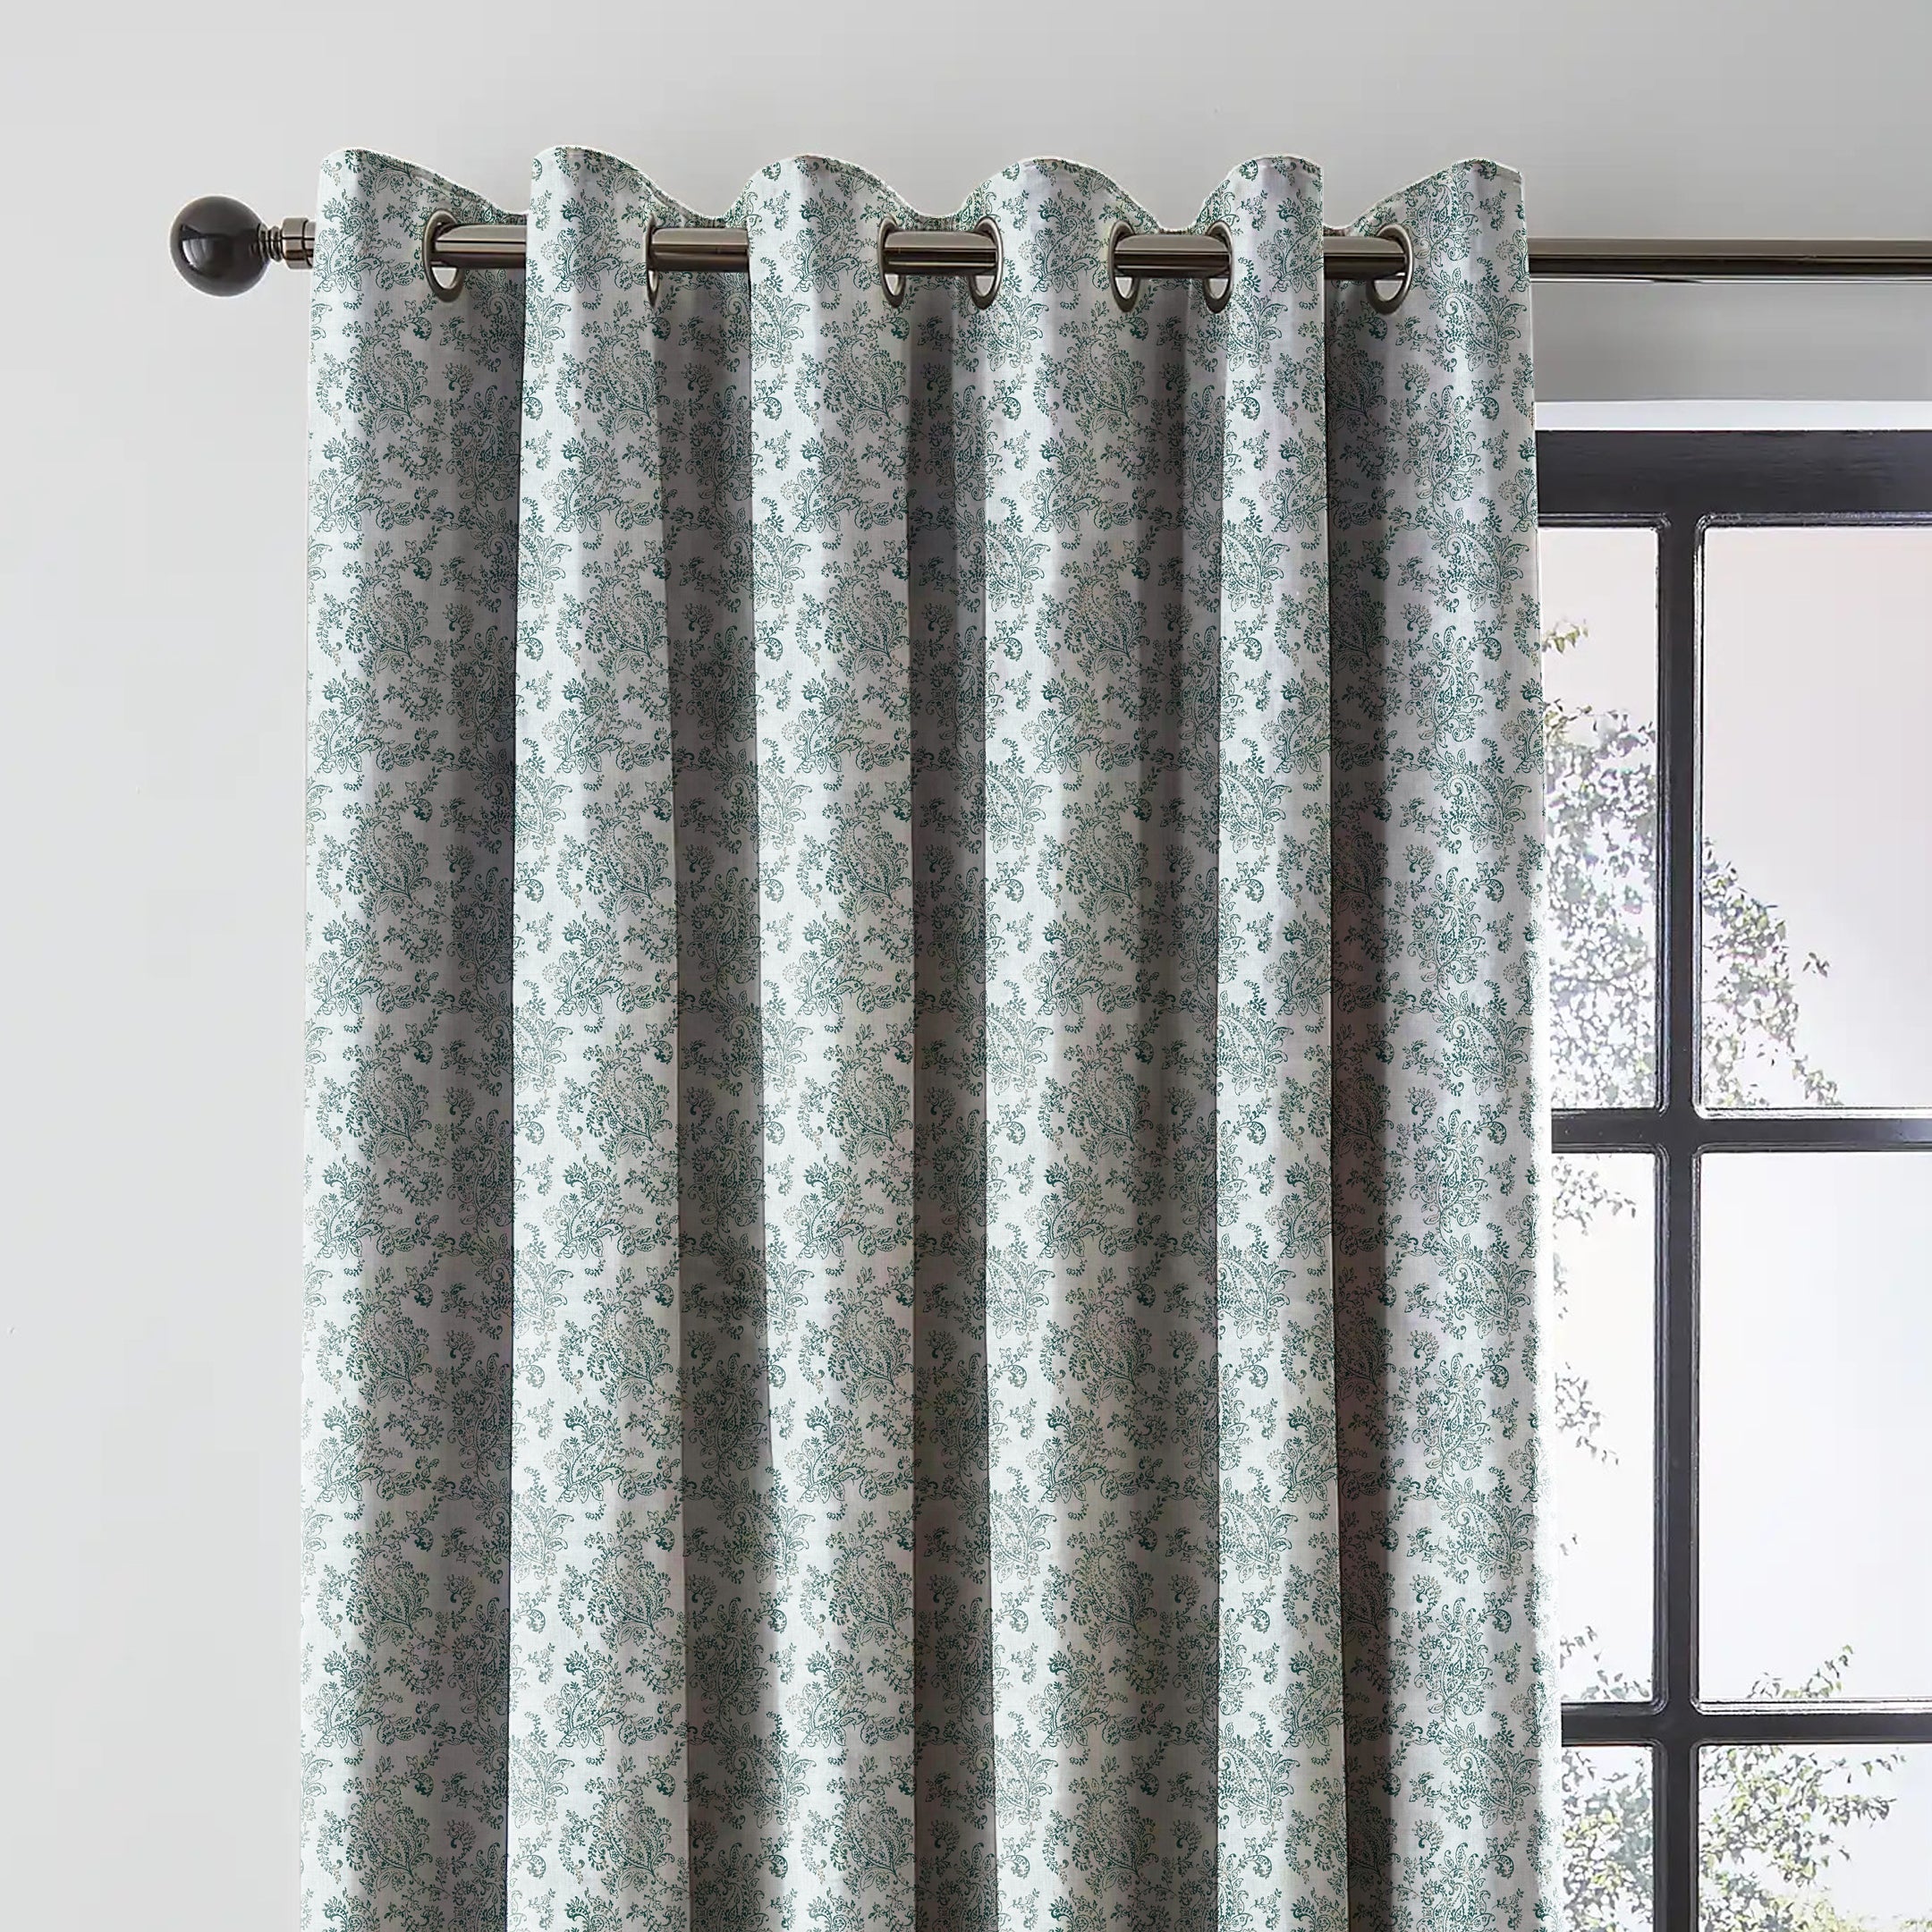 JODHPUR FLOWERS BLACKOUT CURTAIN WHITE AND TEAL